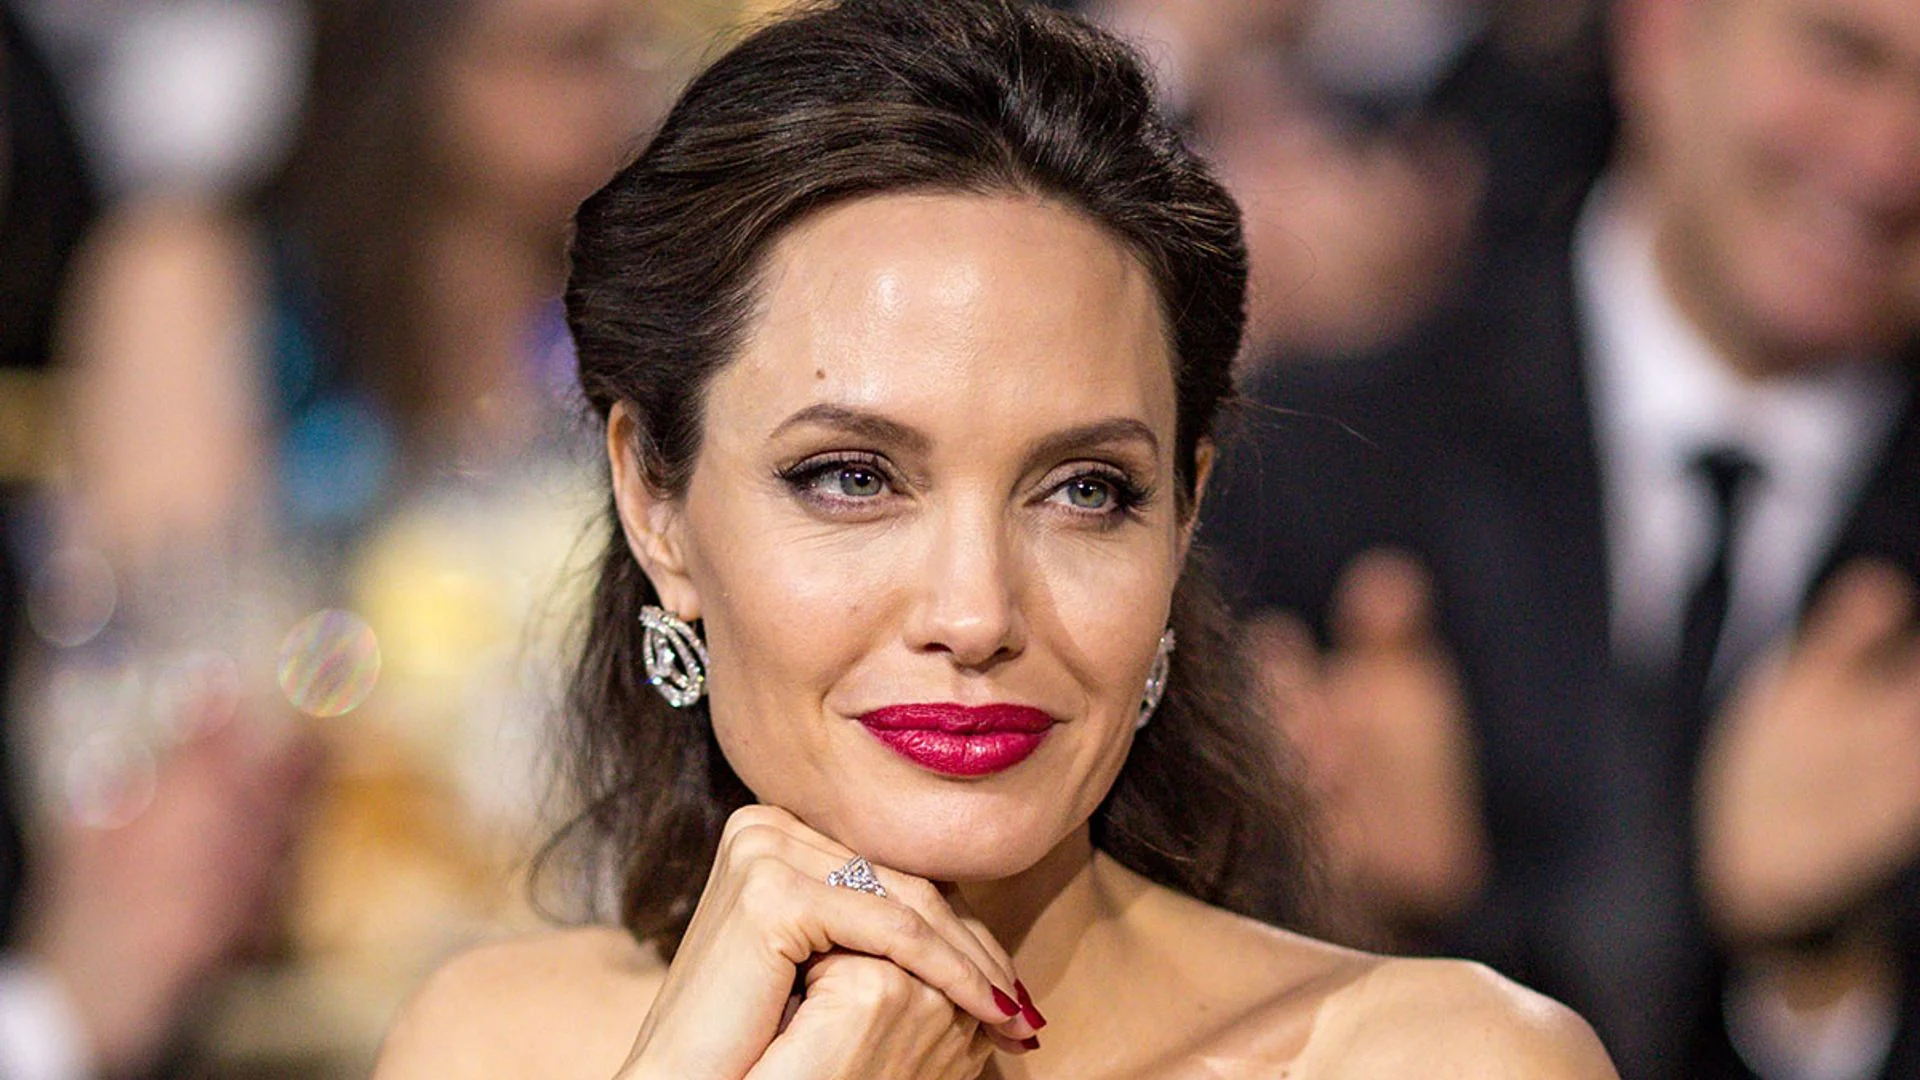 AN INSIDE LOOK AT THE LIFE OF ANGELINA JOLIE: A CELEBRITY PROFILE